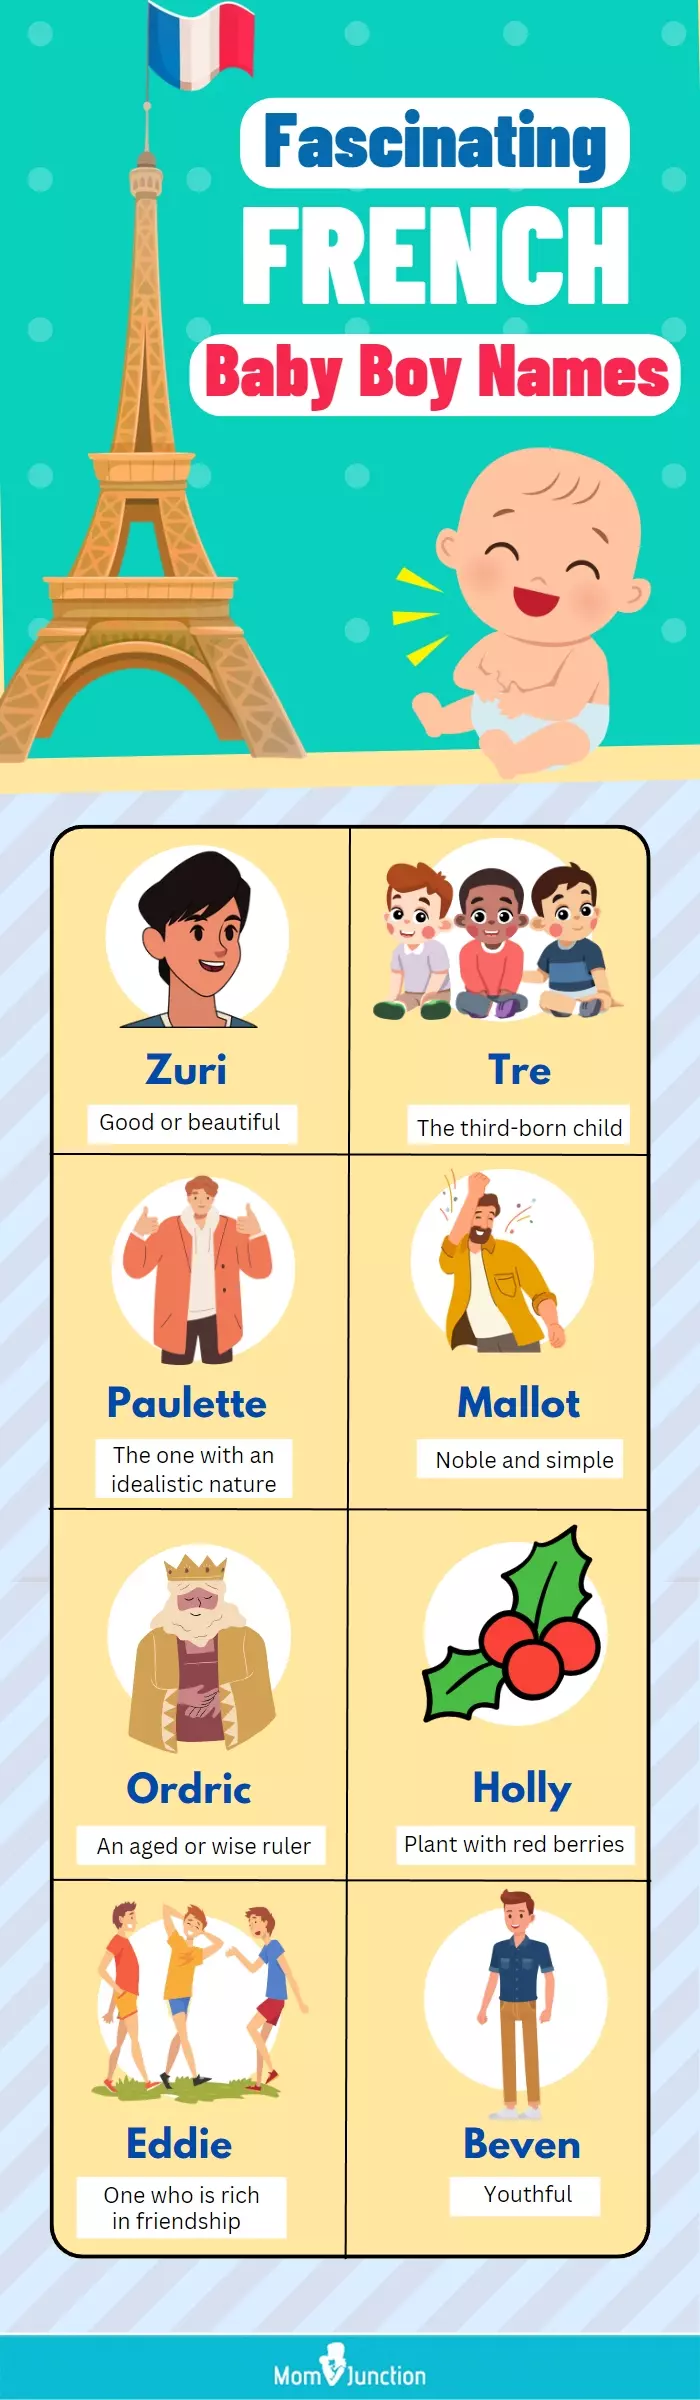 fascinating french baby boy names (infographic)